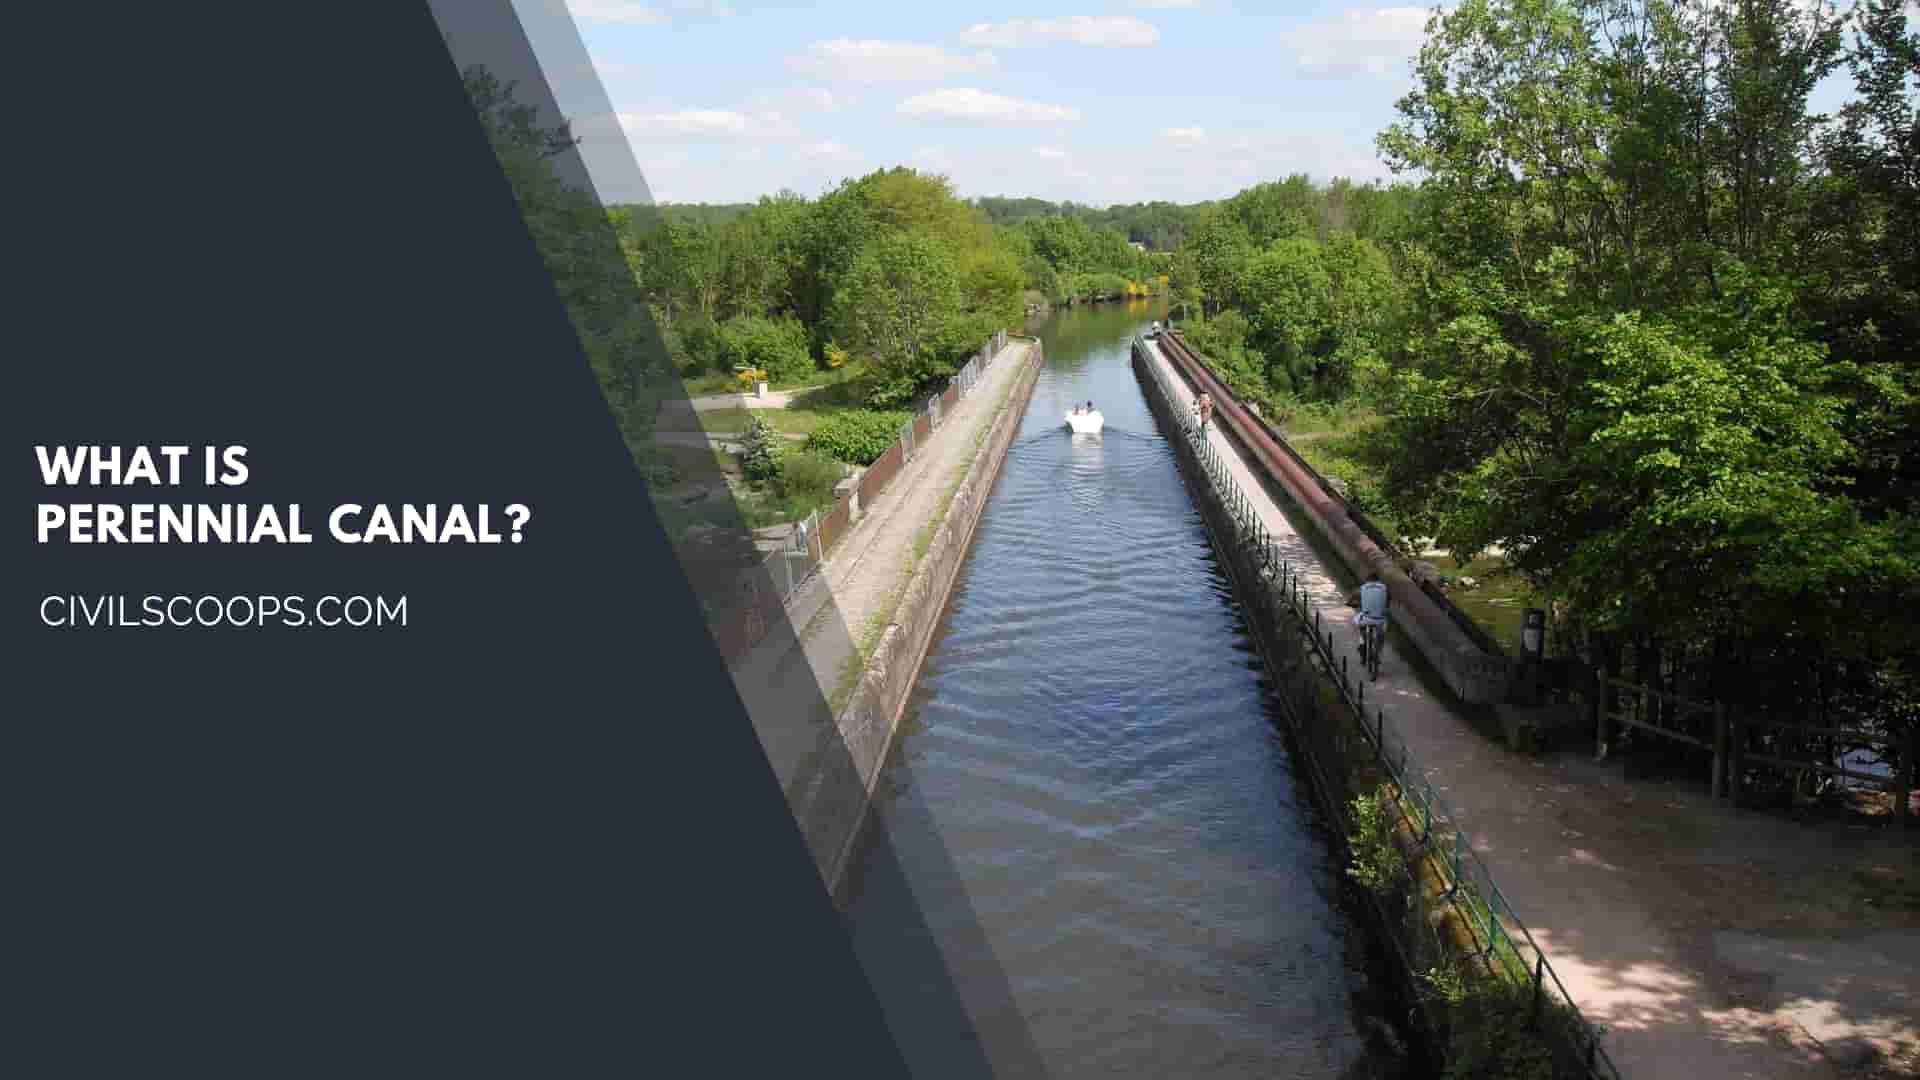 What Is Perennial Canal?